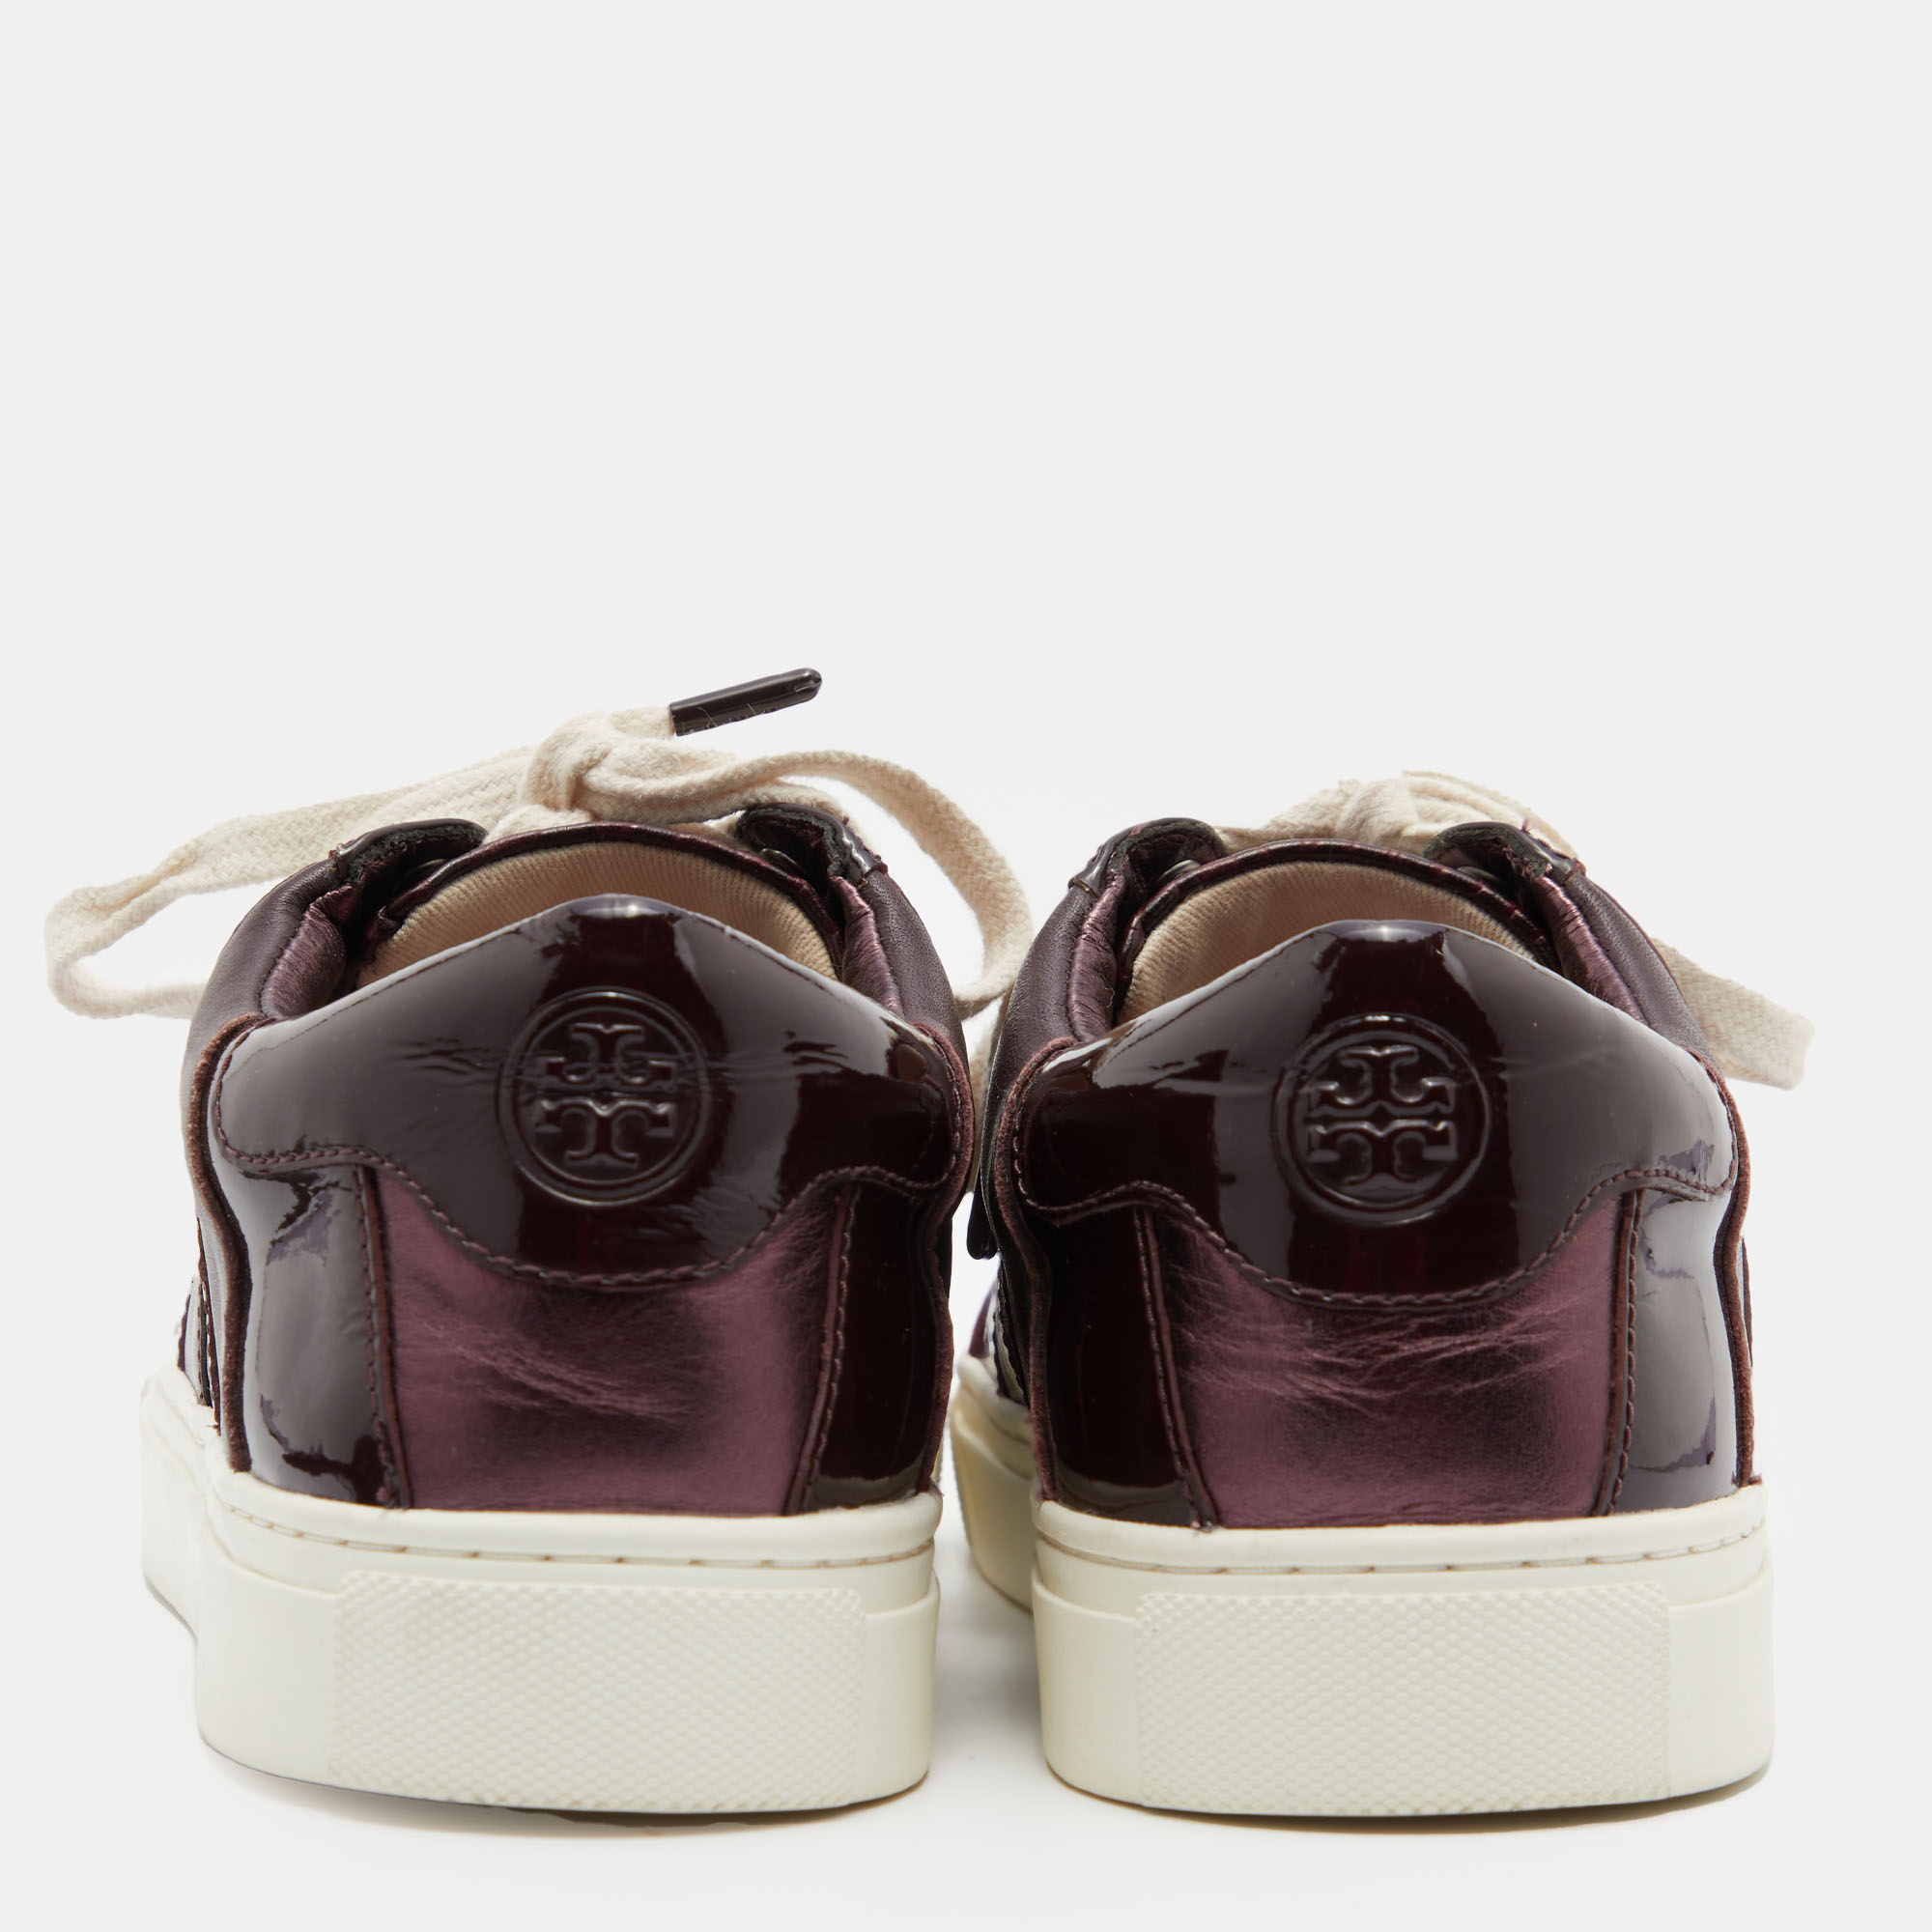 Tory Burch Burgundy Croc Embossed Leather And Patent  Low Top Sneakers Size 39